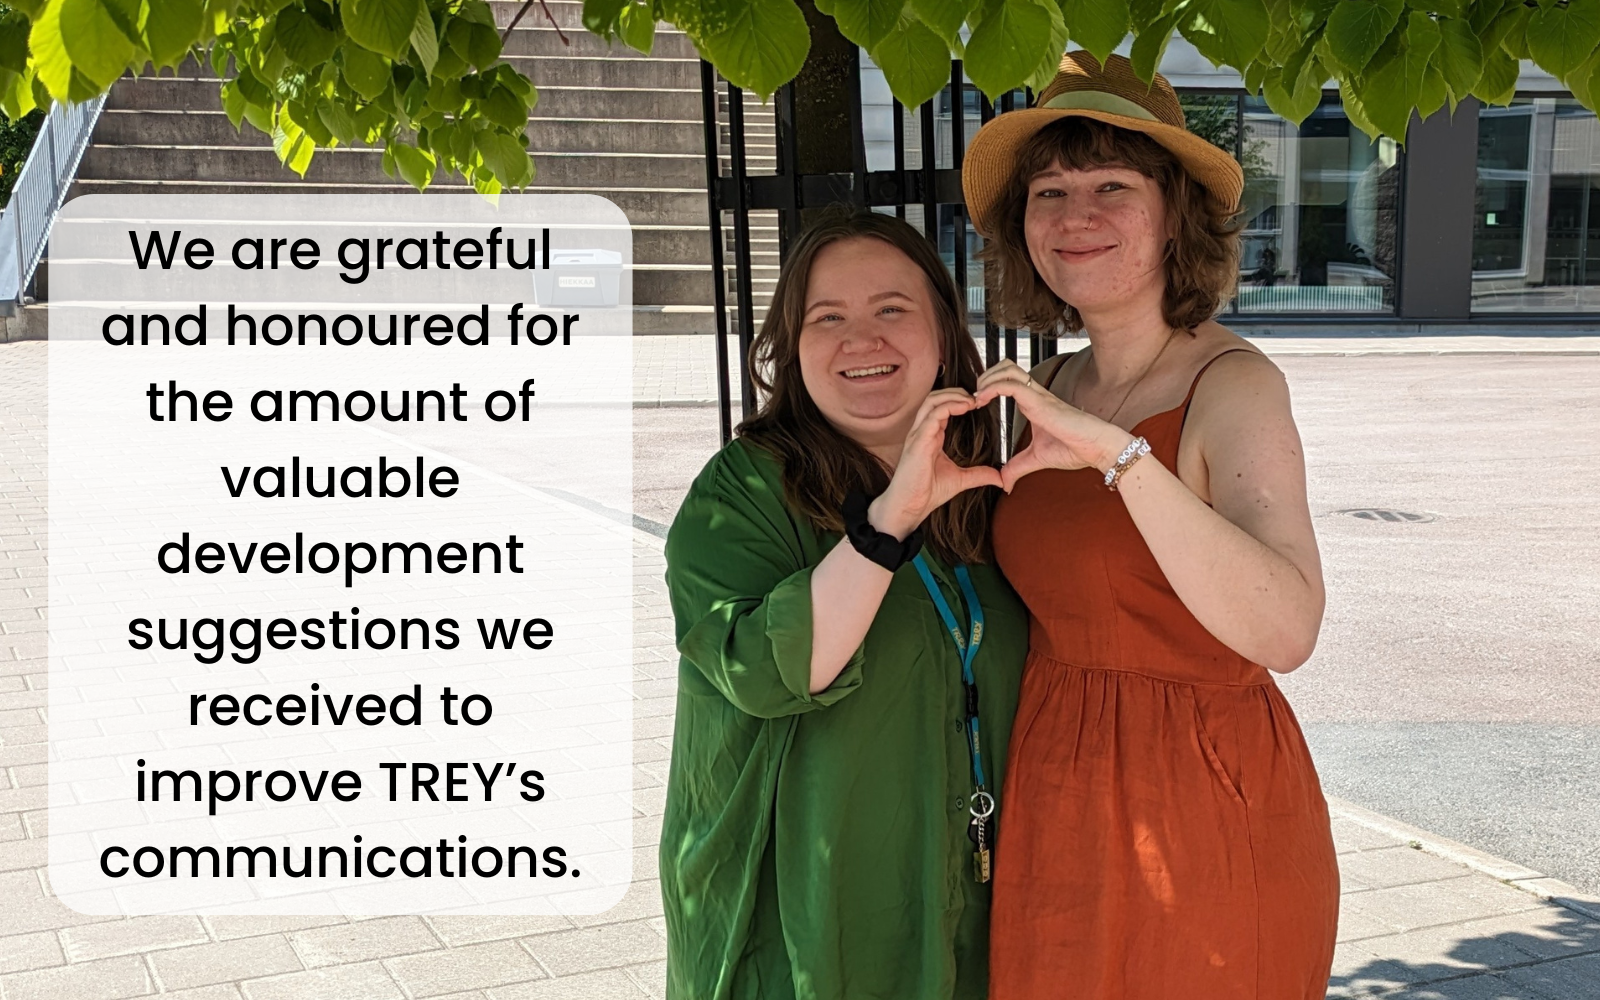 TREY's communications sector and a quote from their blog post.